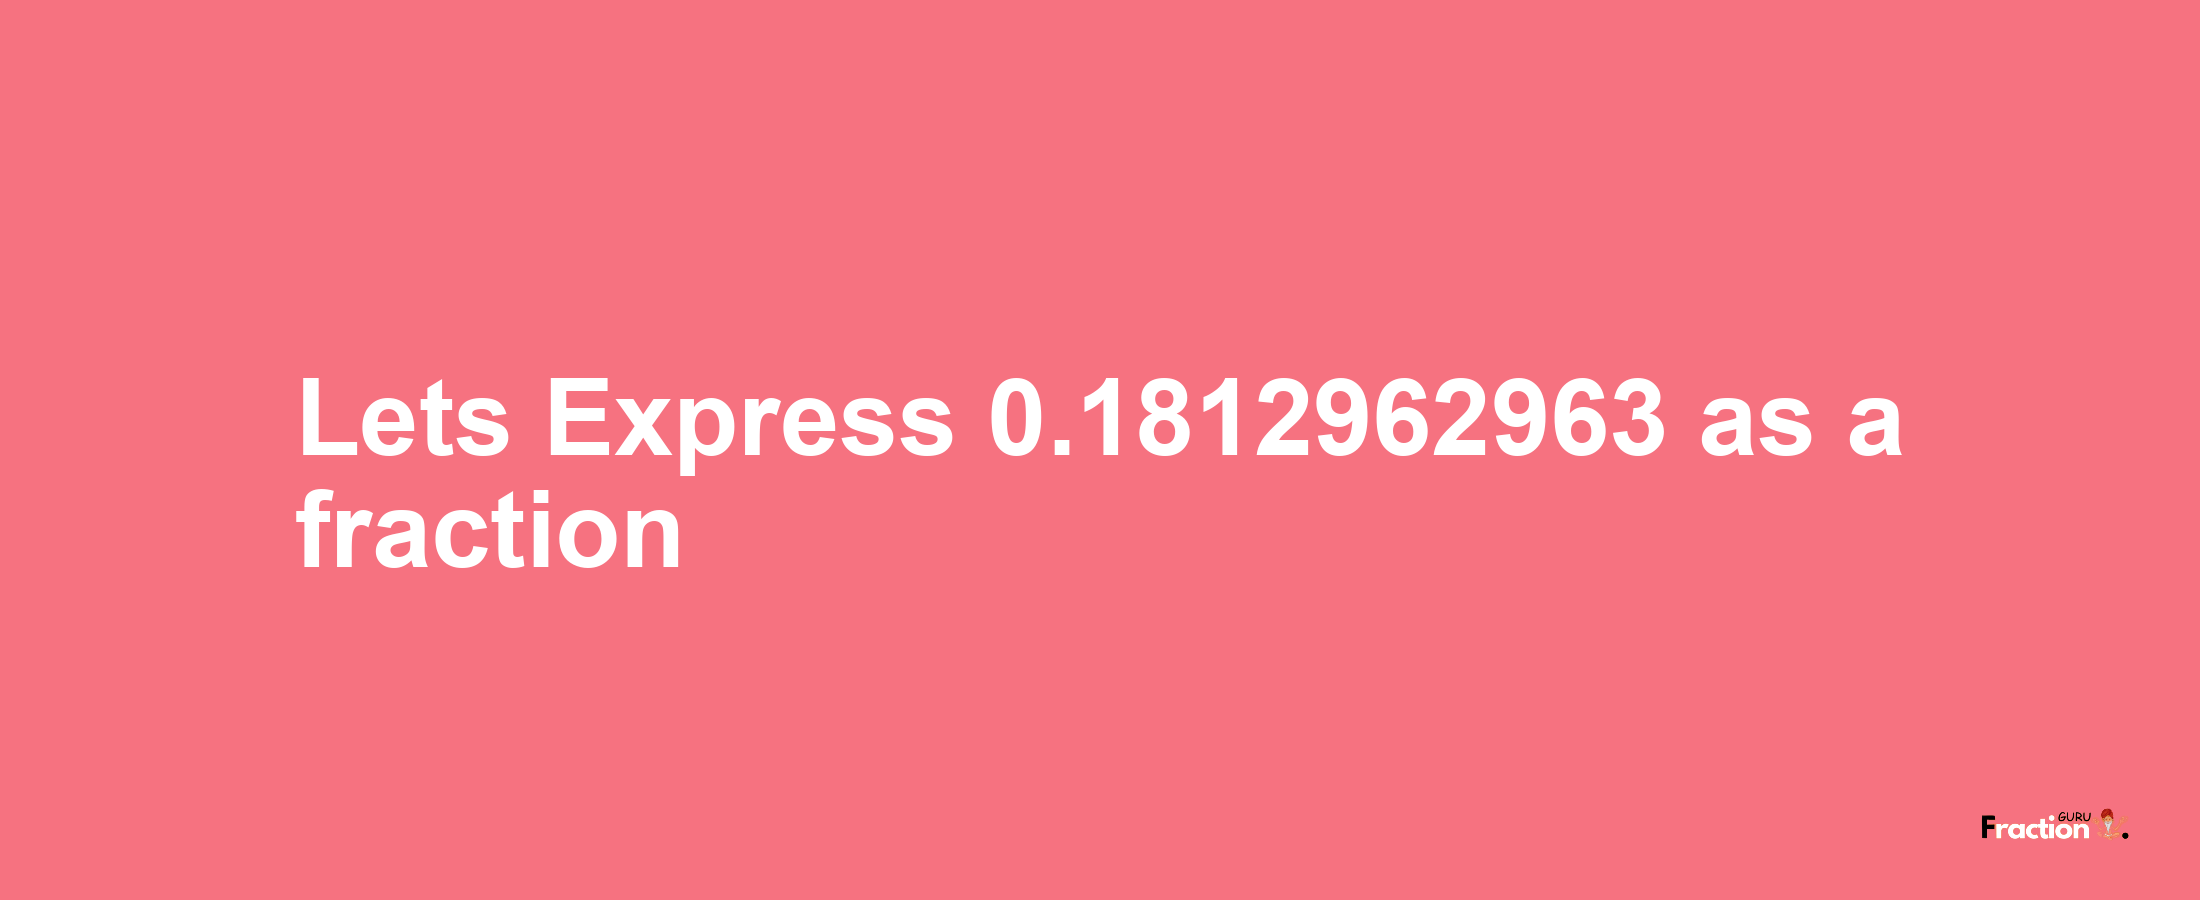 Lets Express 0.1812962963 as afraction